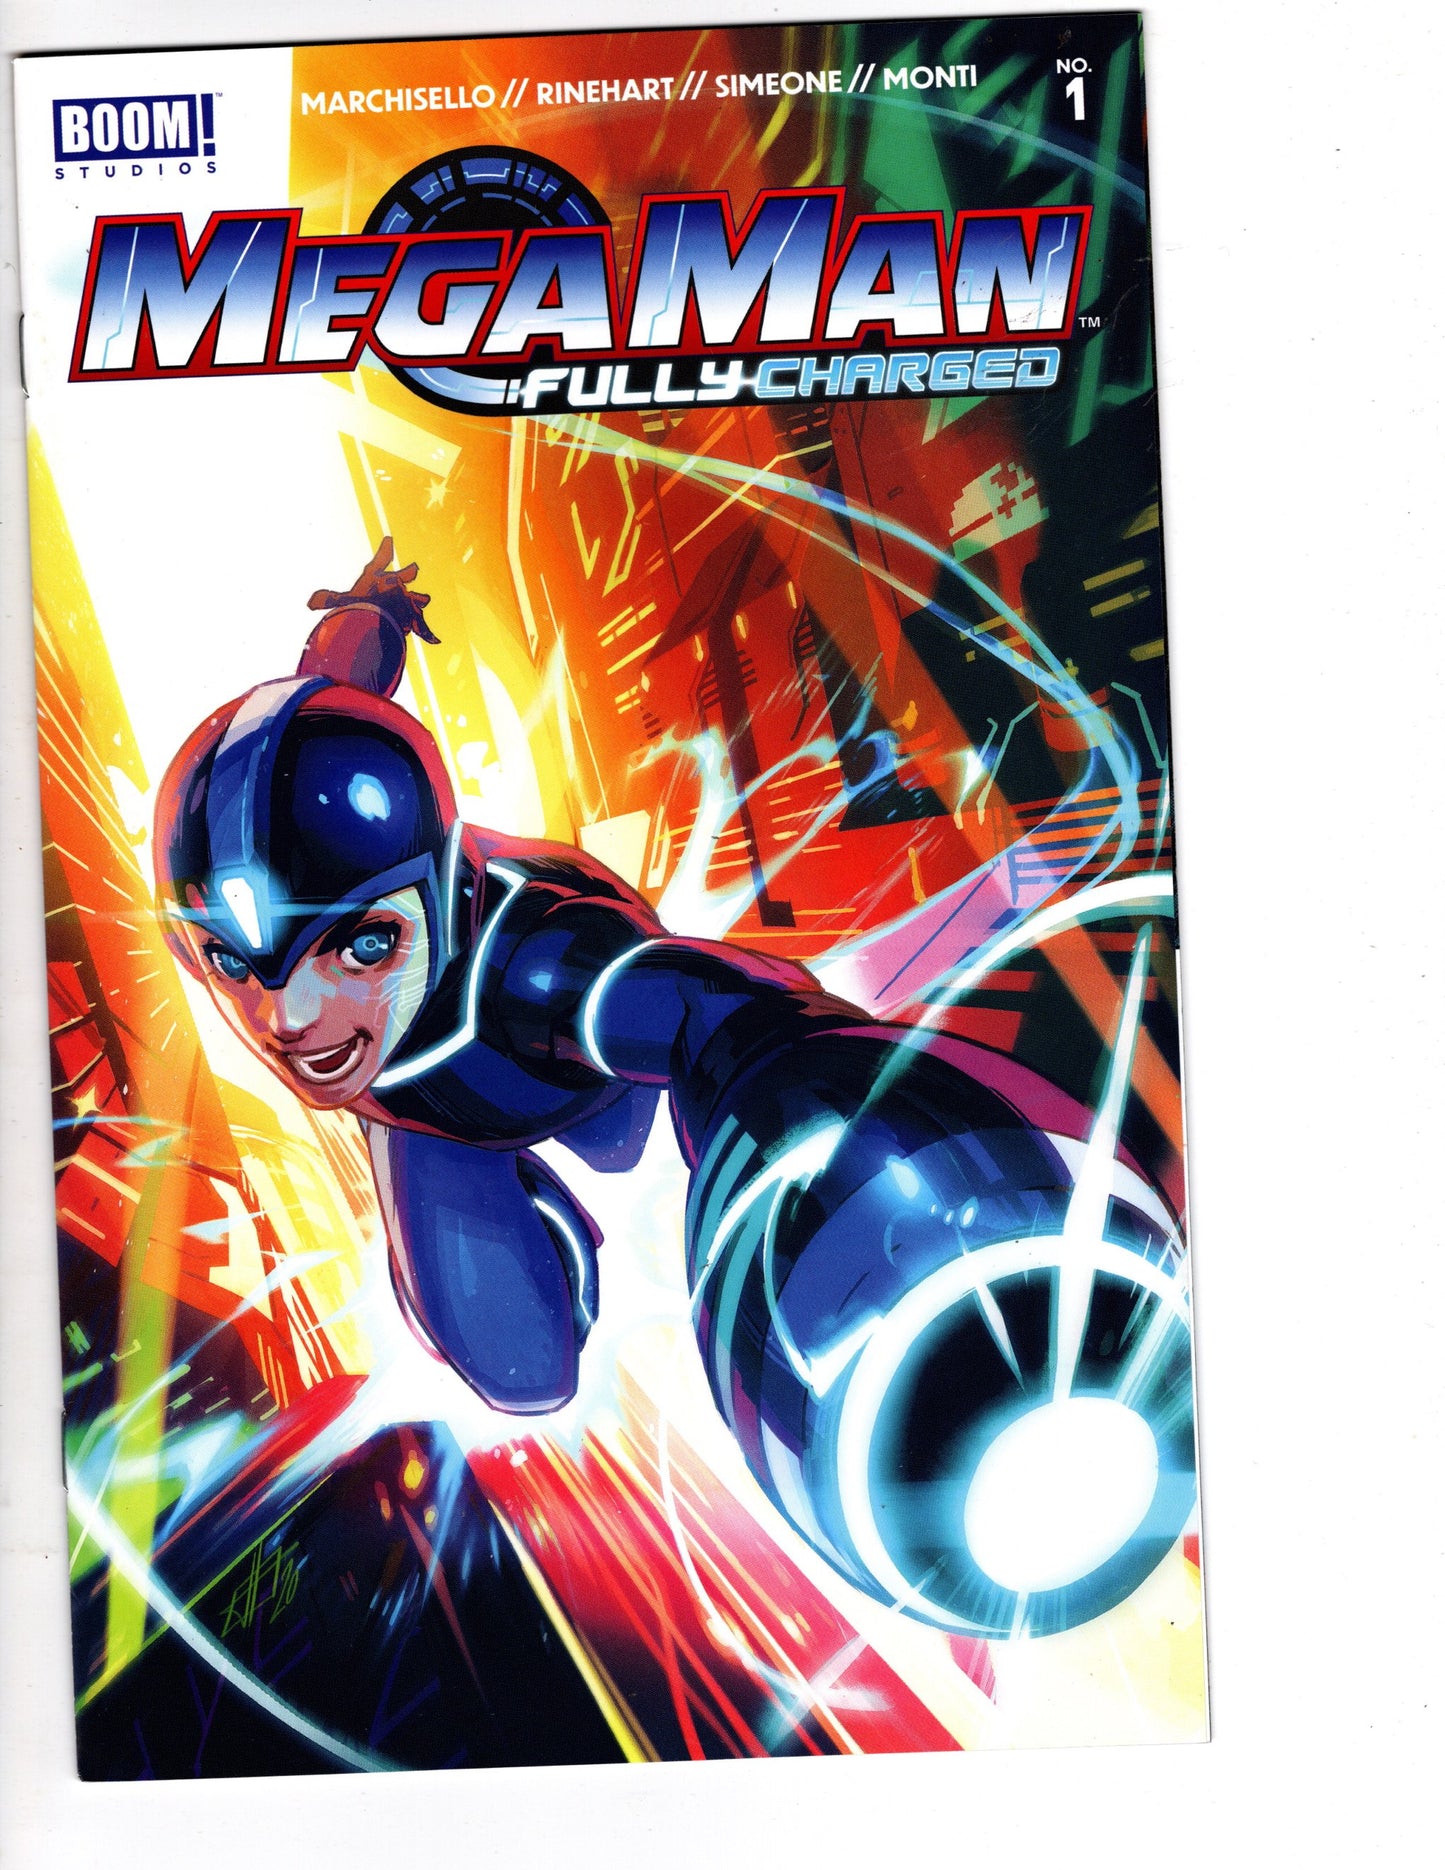 Megaman Fully Charged #1